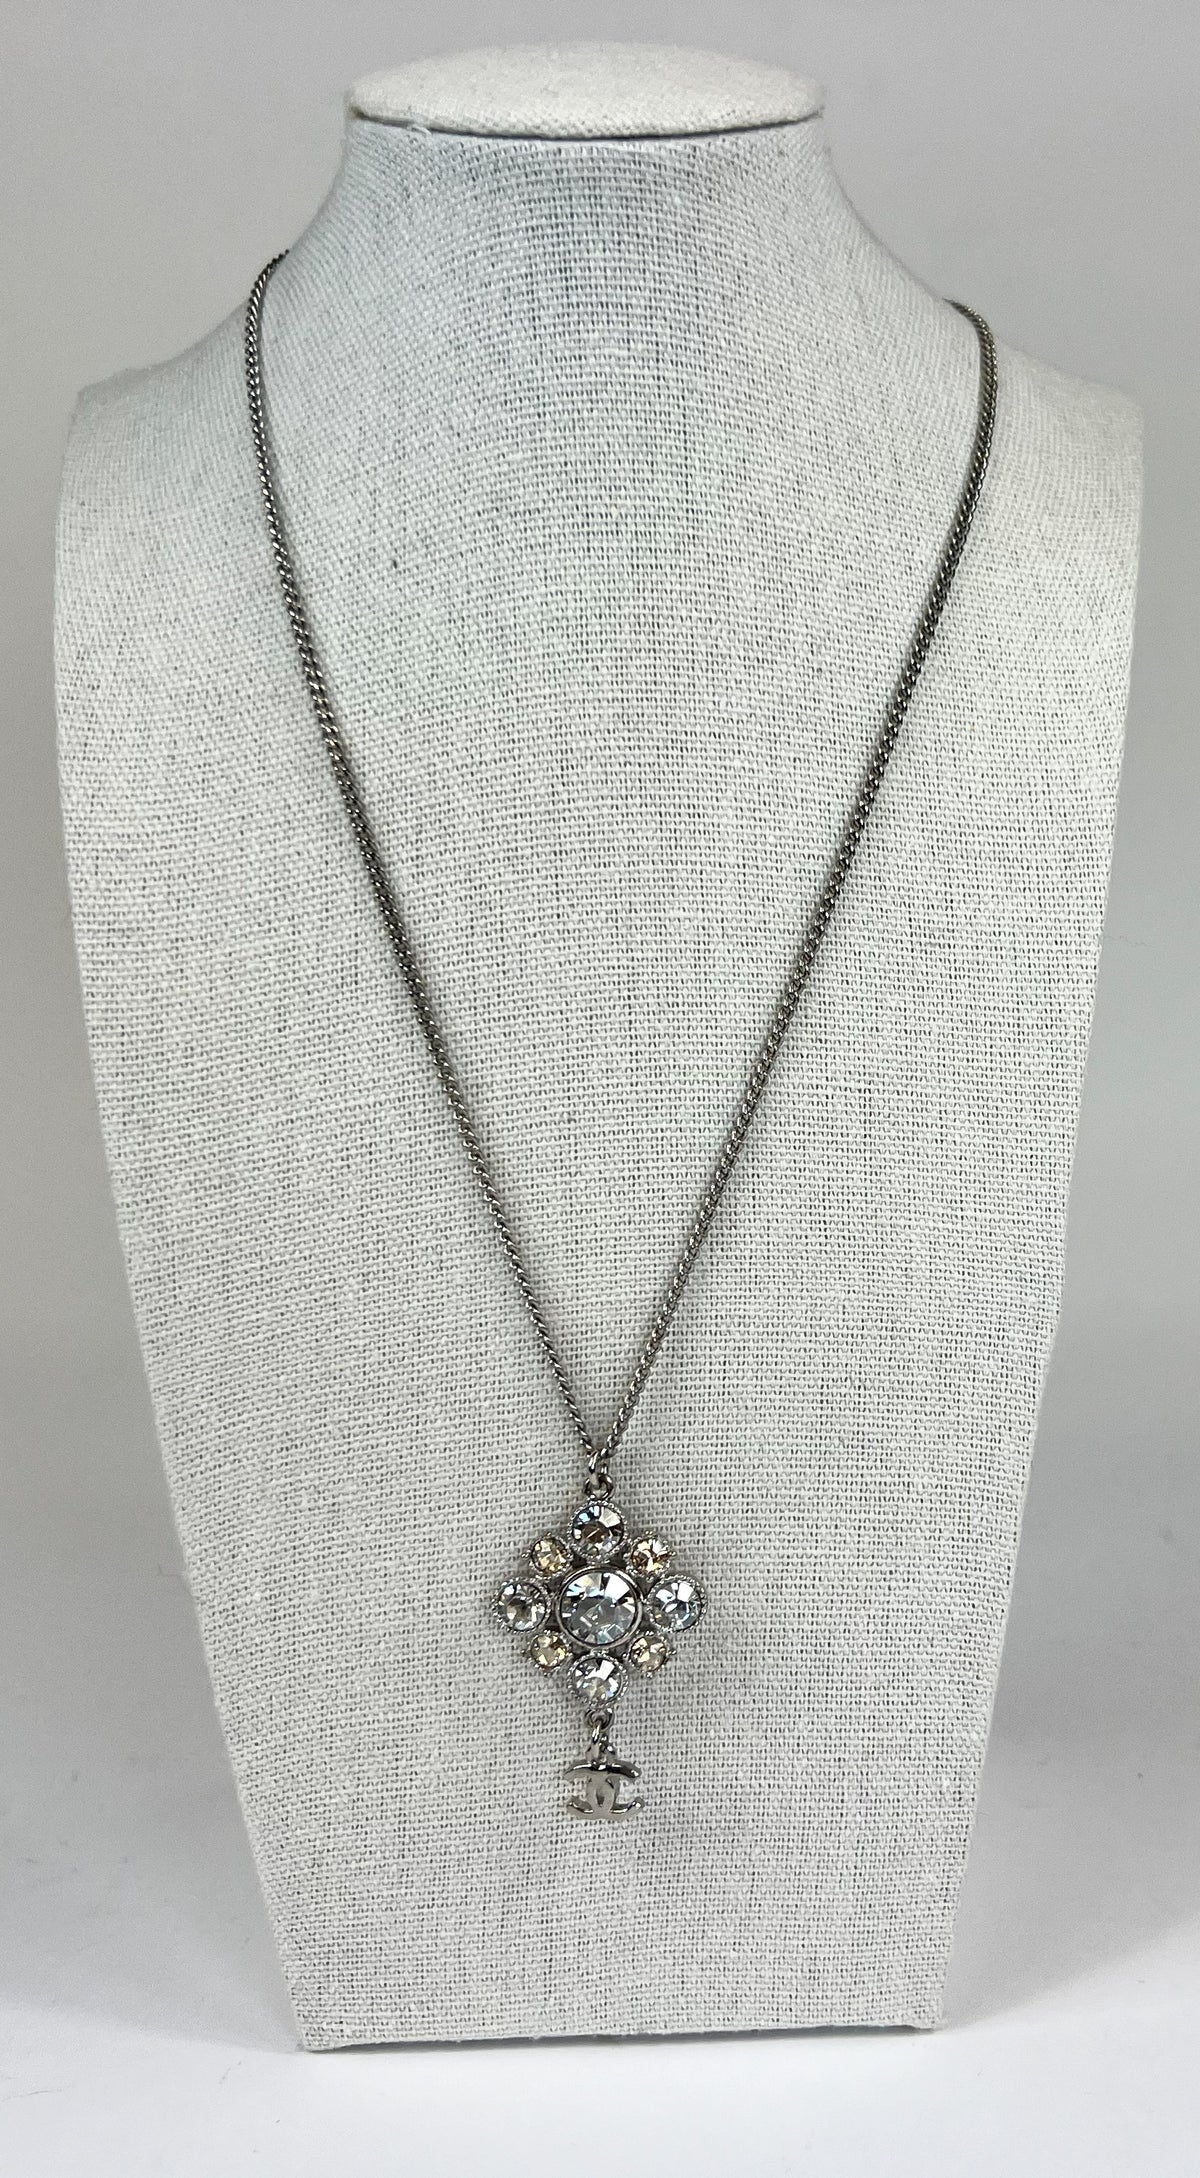 Excellent Pre-Loved Silver Tone Metal with White and Light Yellow Crystal Embellished Floral Pendant Drop Necklace. (front)